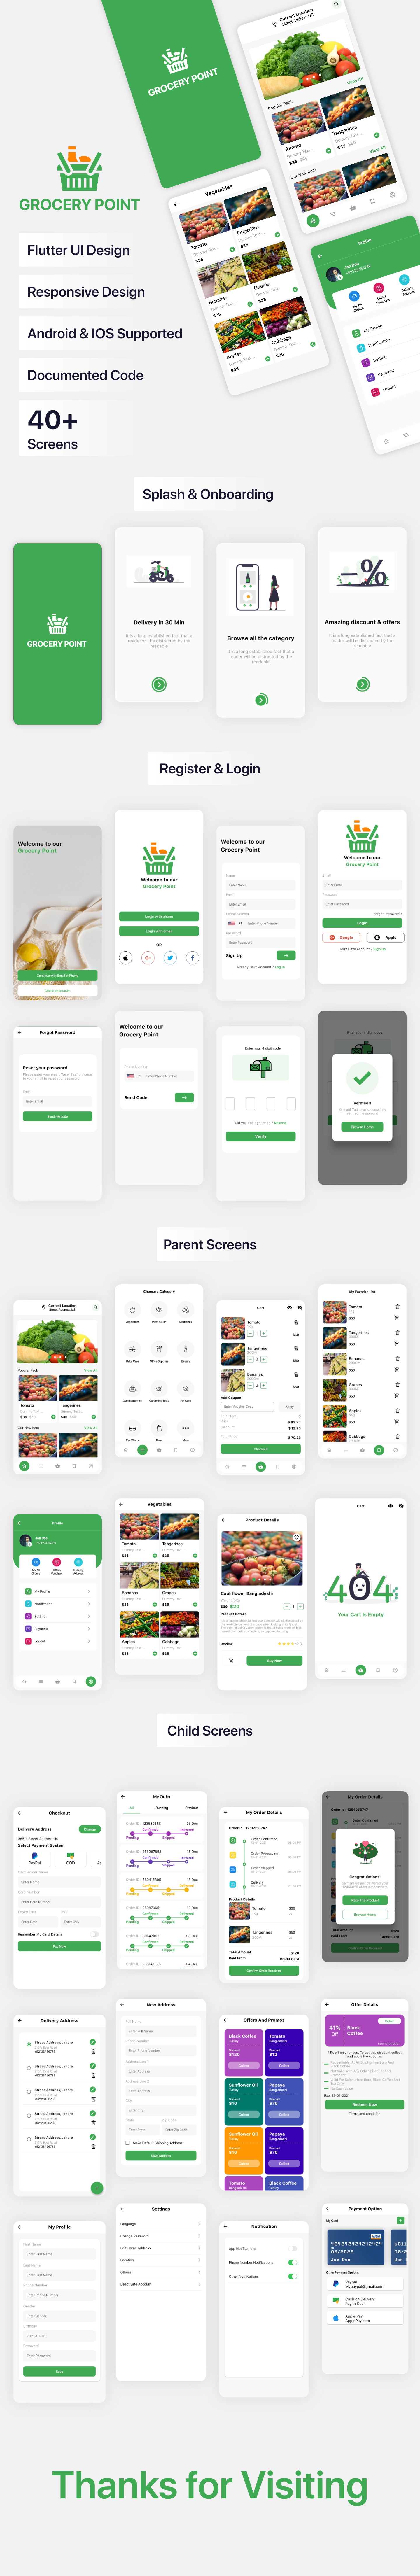 Grocery Point App Mockup